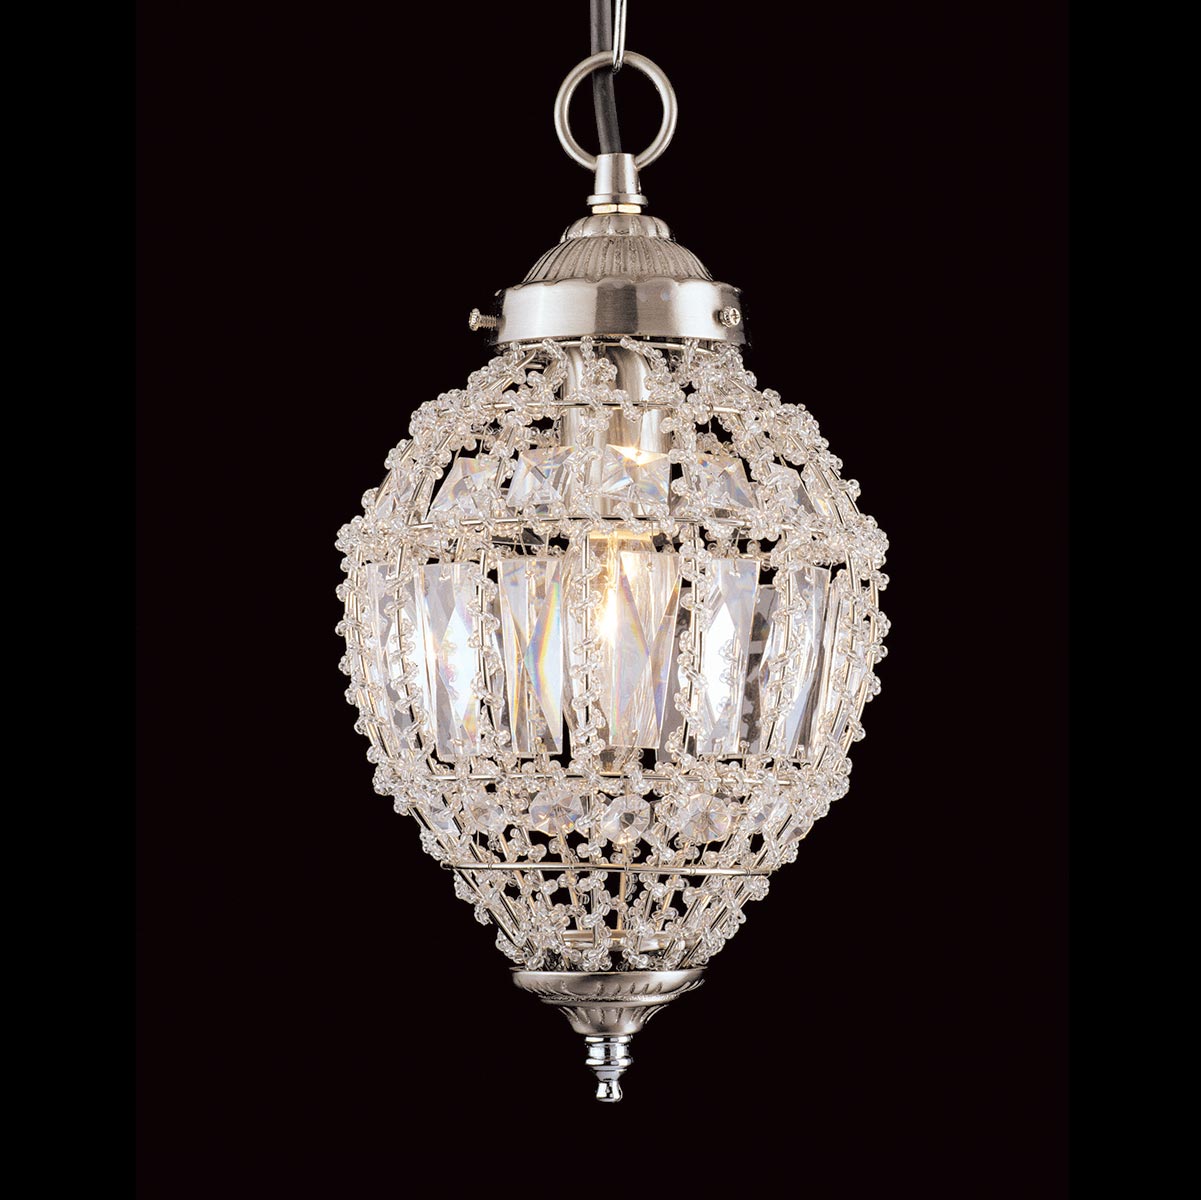 Impex Bombay Small 1 Light Moroccan Style Crystal Pendant Satin Nickel